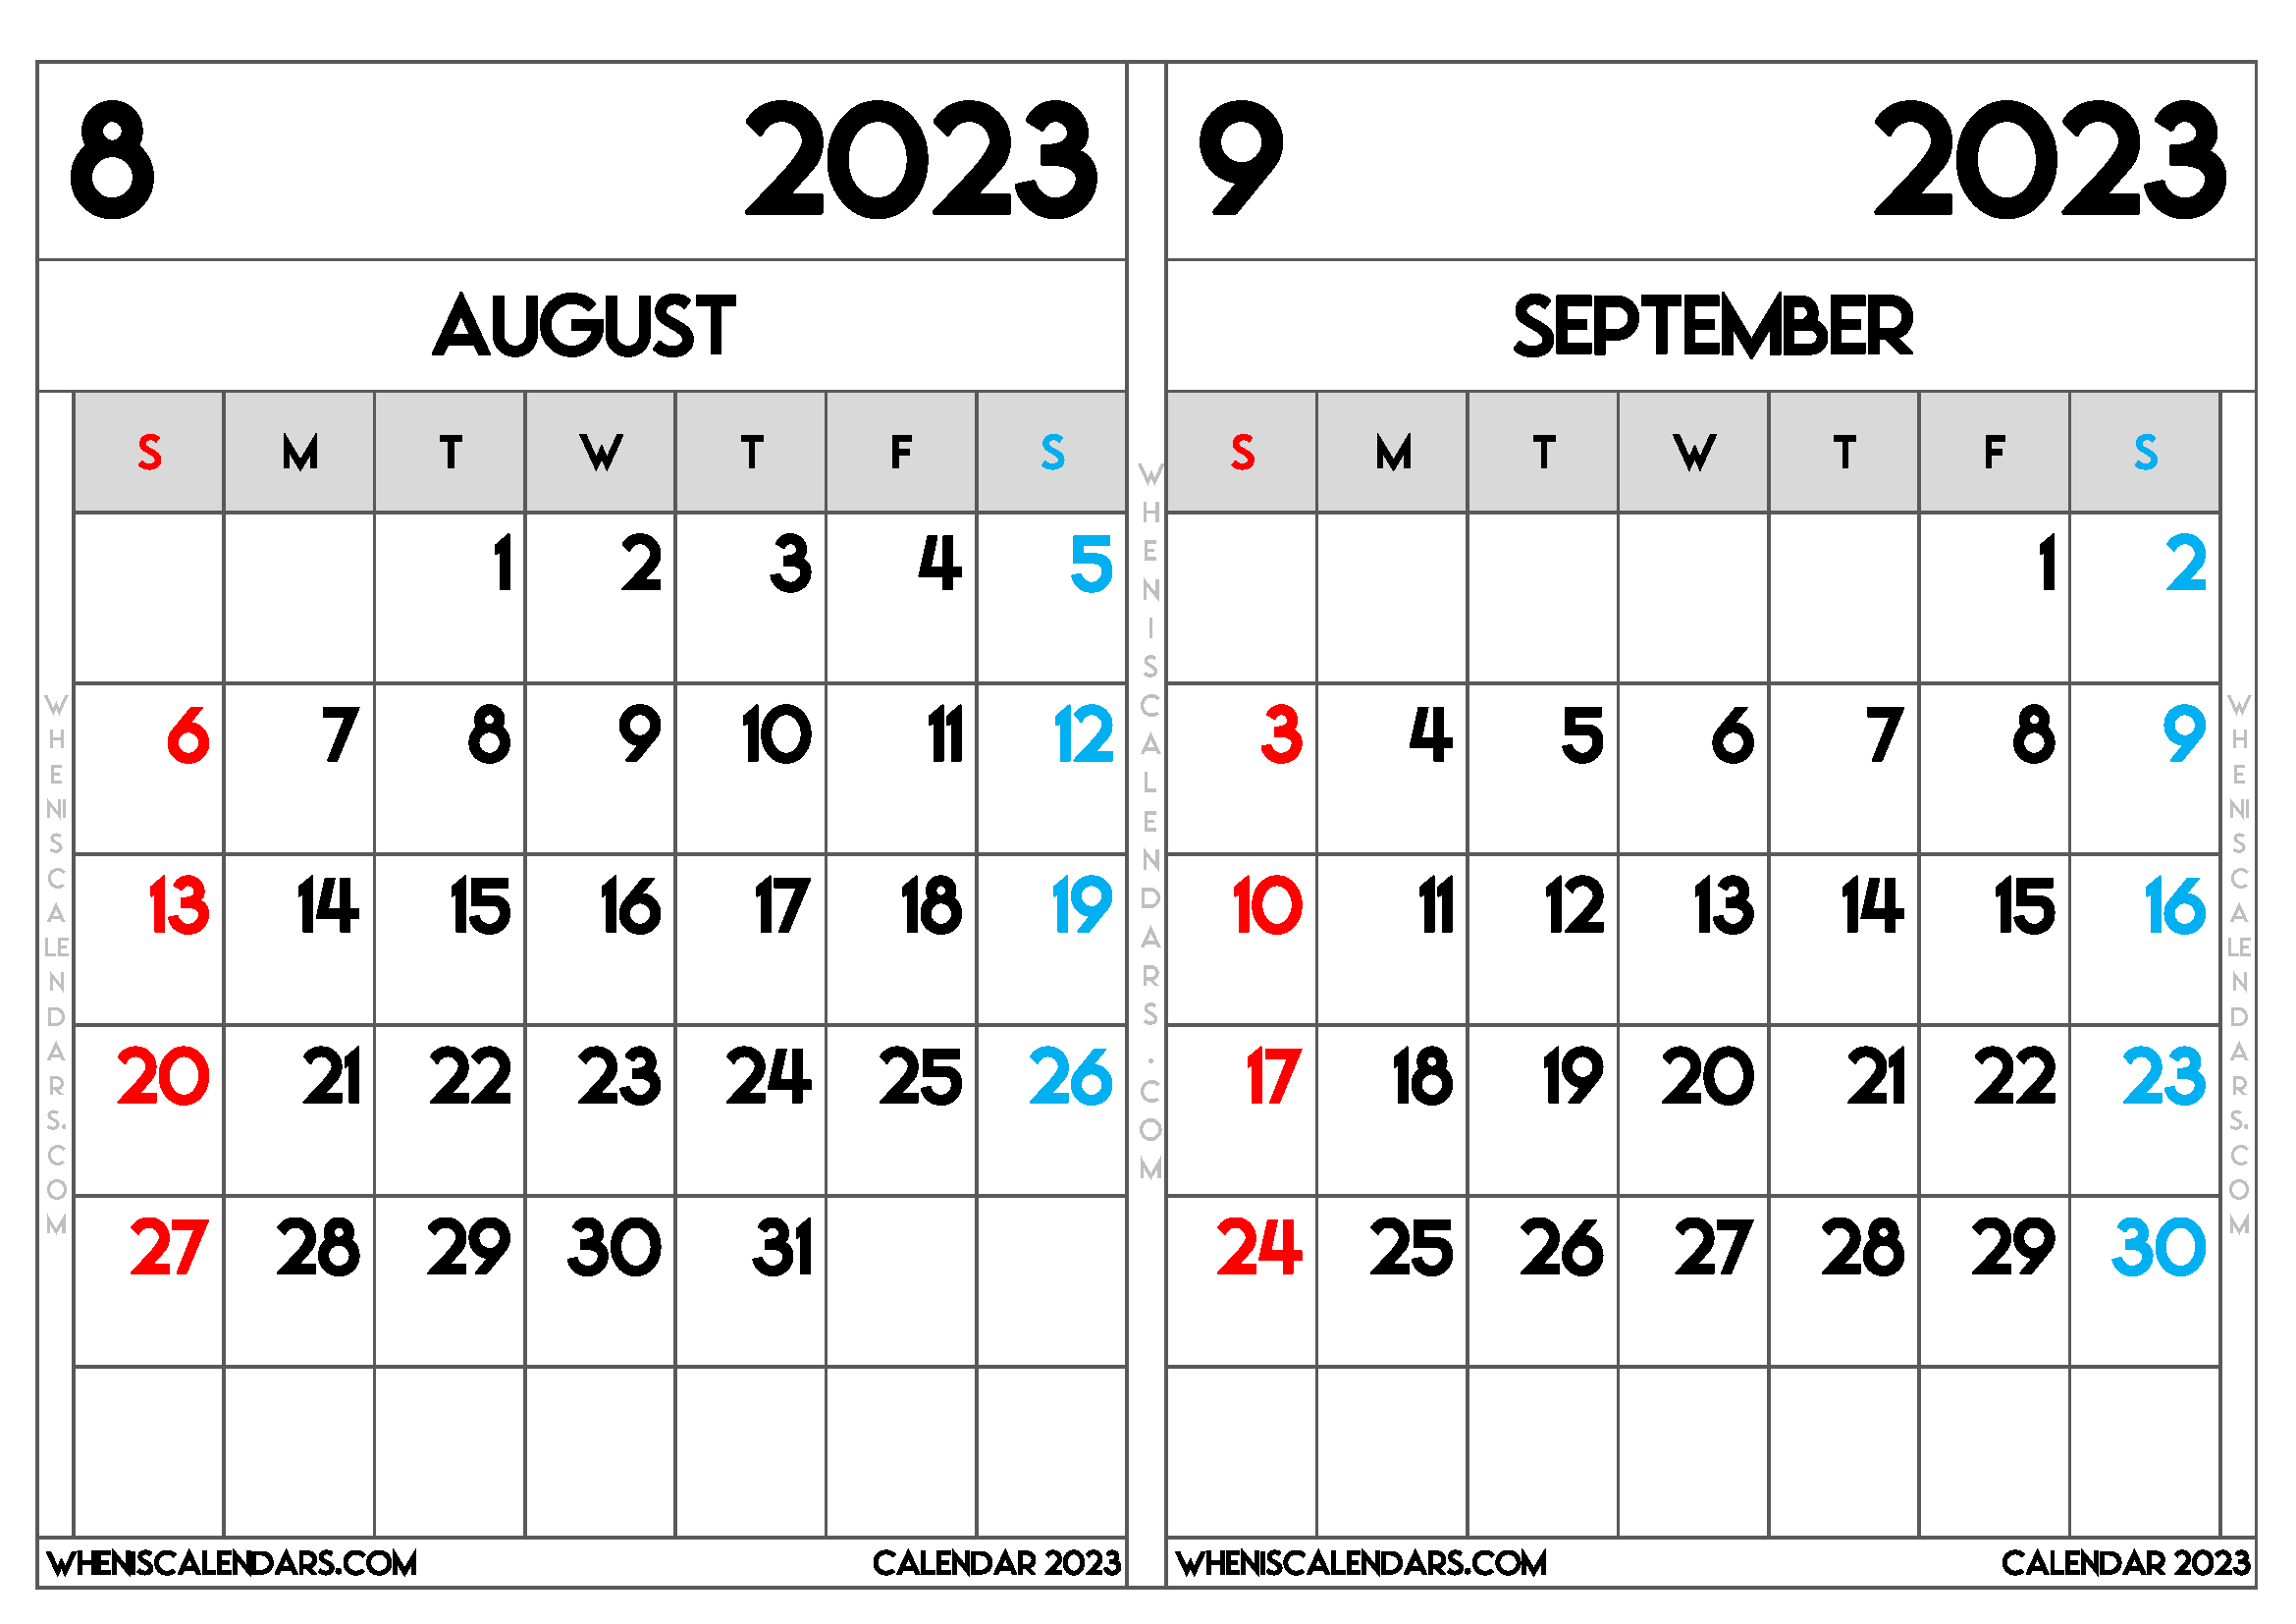 Download Free Printable August September 2023 Calendar as PDF and PNG Image